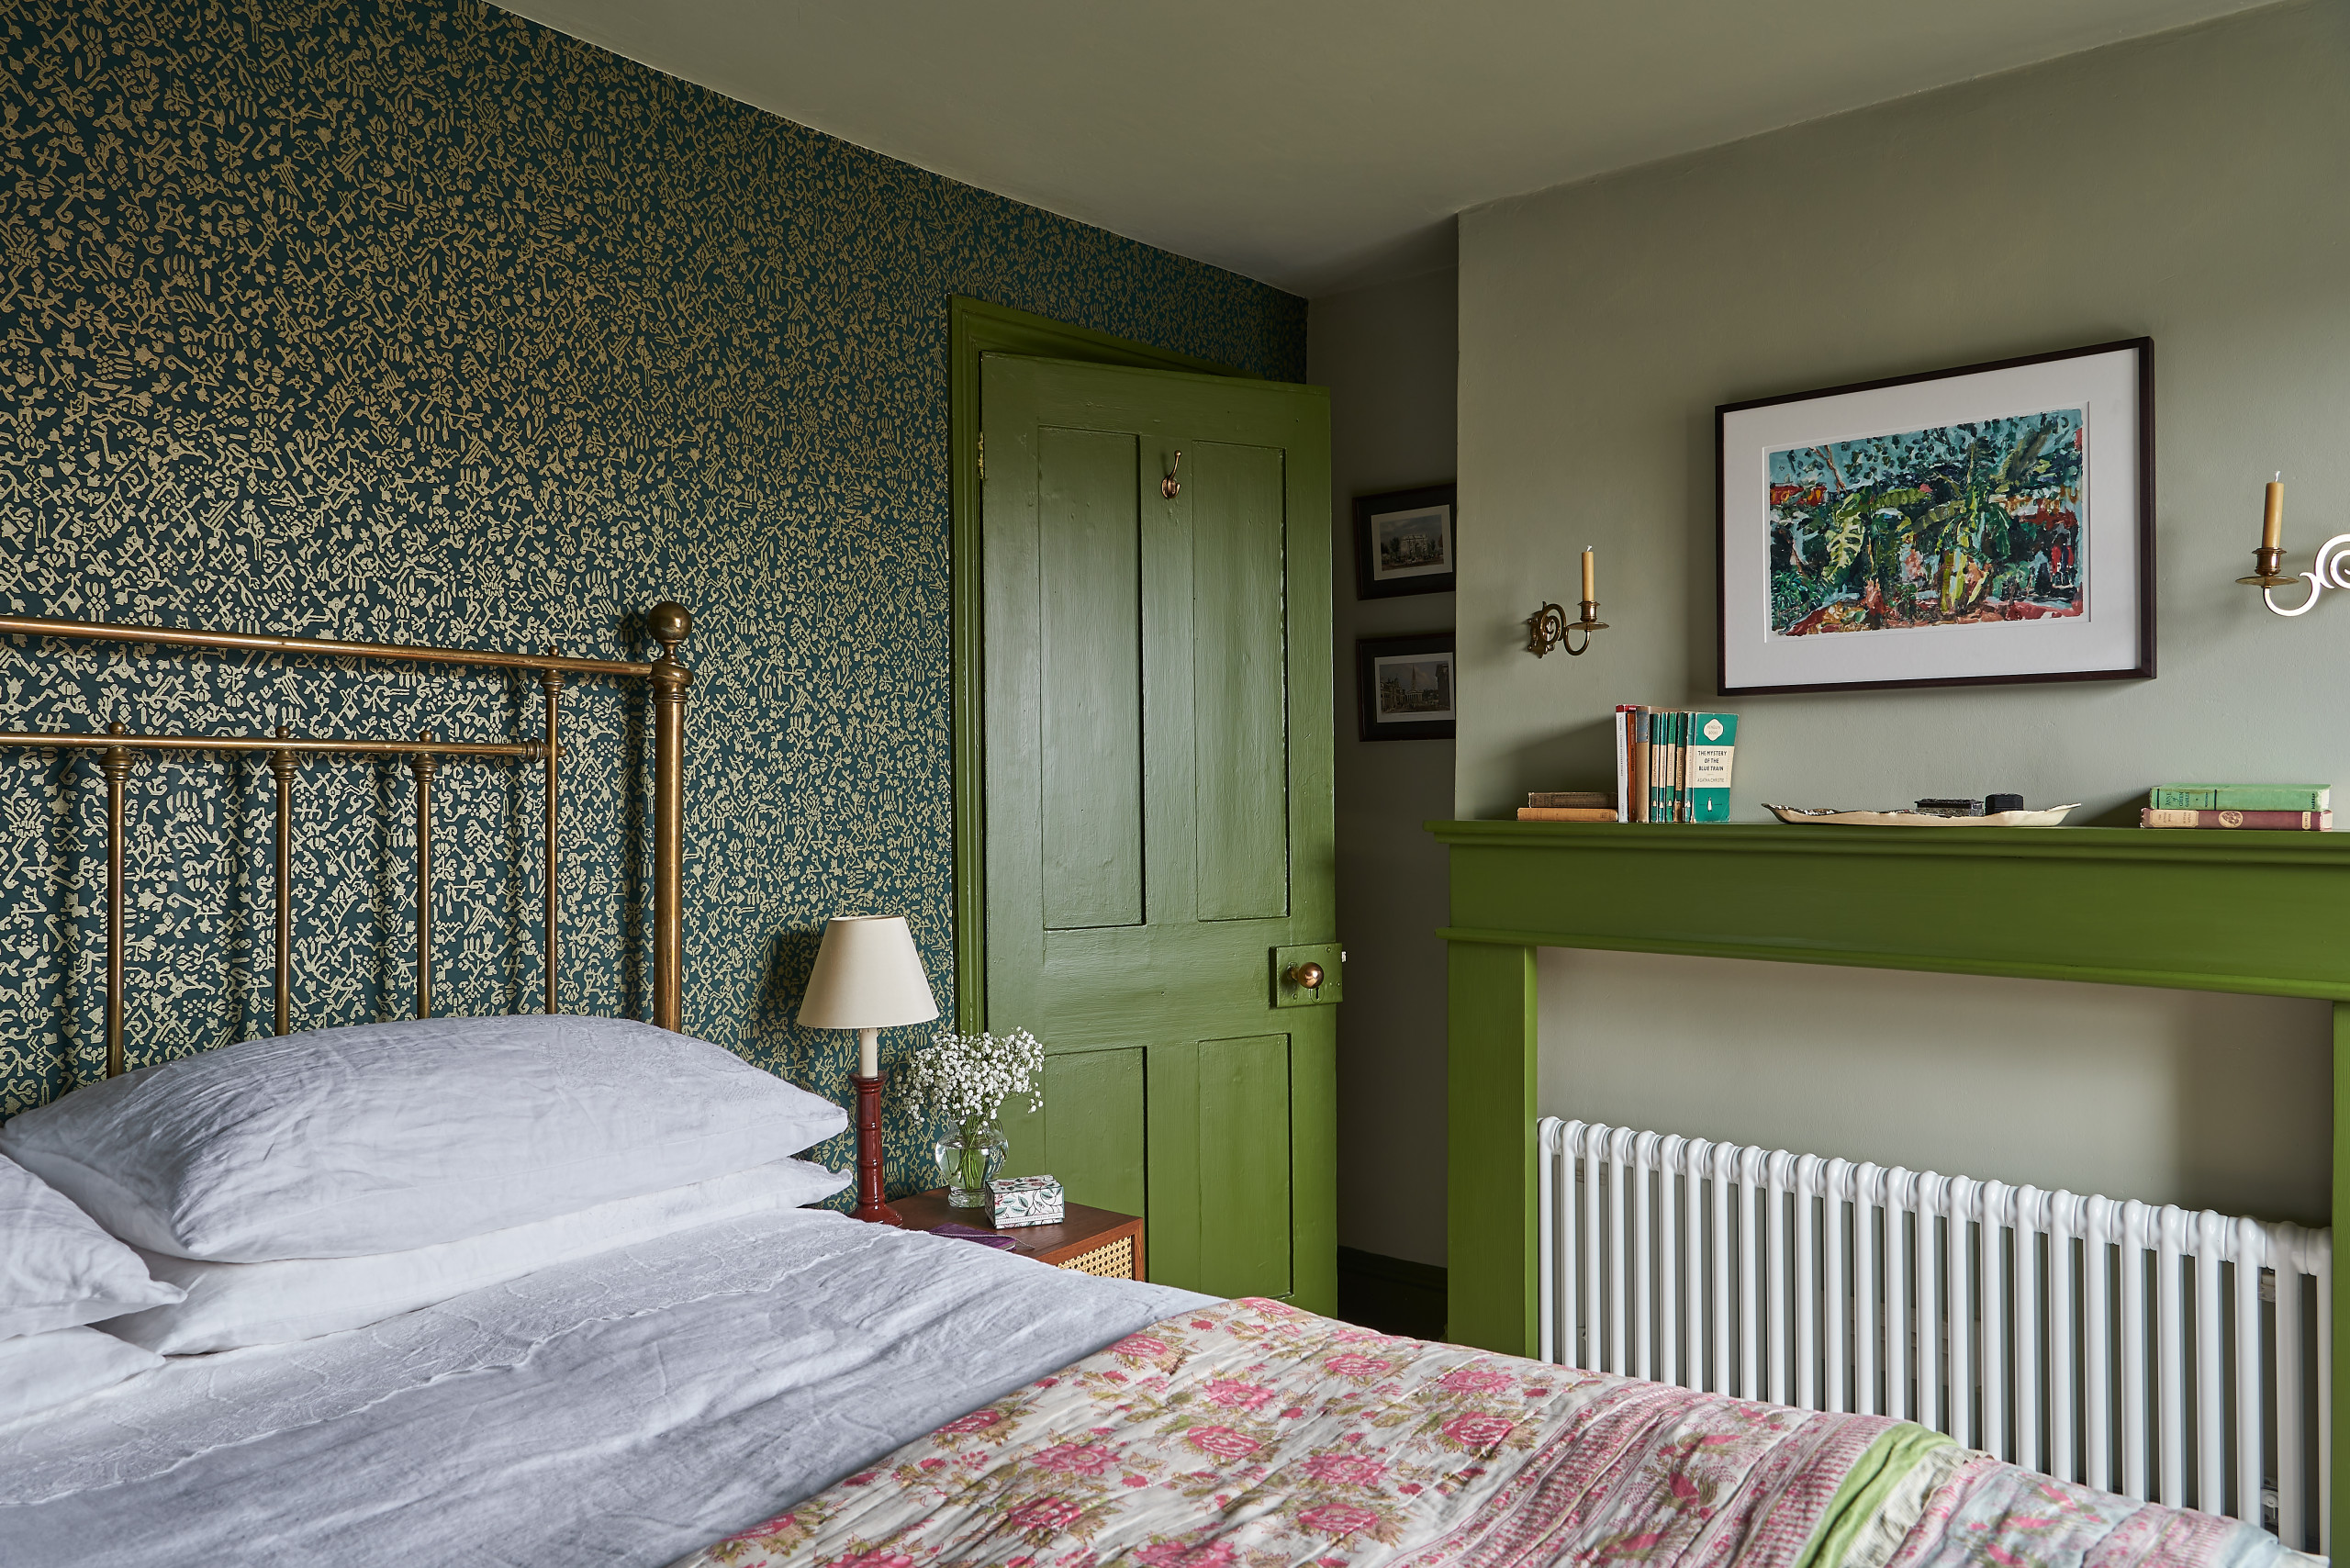 75 Beautiful Green Bedroom with Carpet Ideas and Designs - September 2023 |  Houzz UK